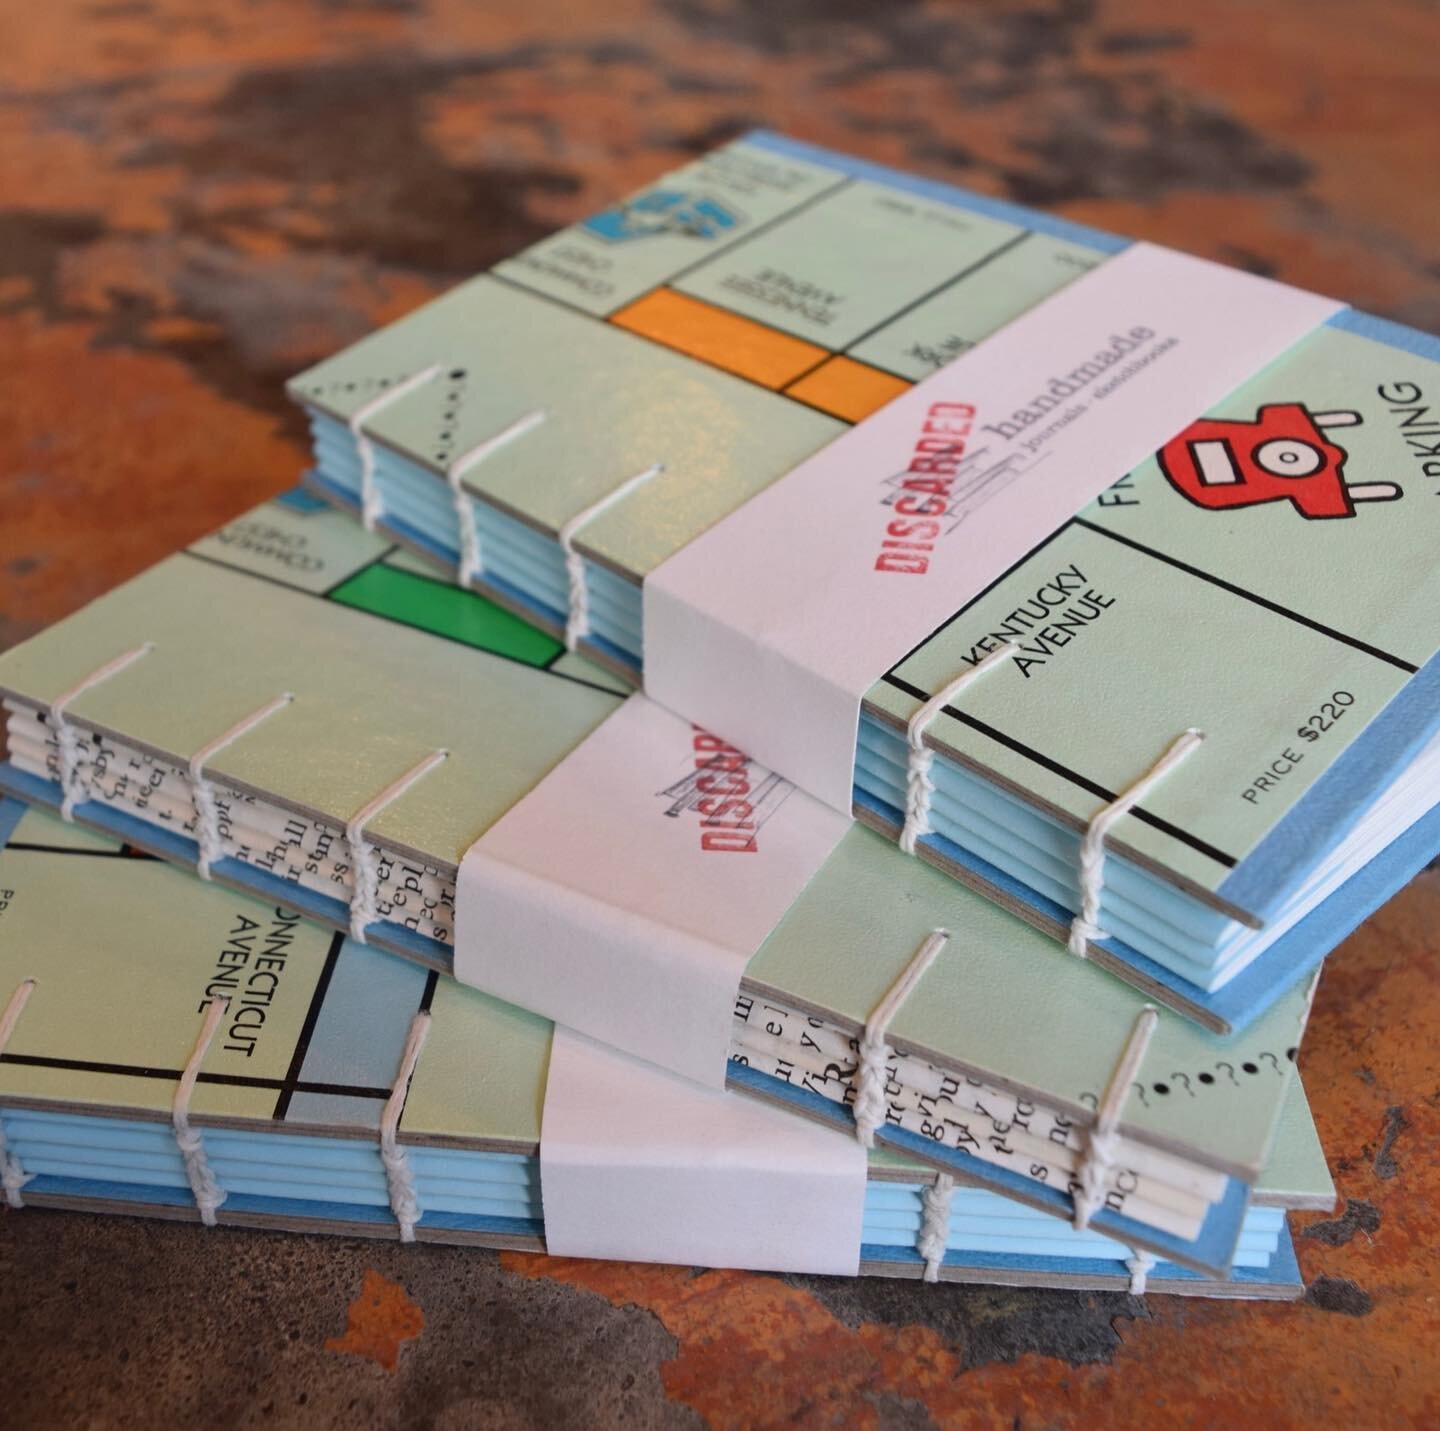 📚 NEW PRODUCT LAUNCH 🚀
For @handmade_omaha !!!

The Jordan&mdash;Board Game Book

These new books are inspired by 
my brother Jordan who loves gaming in all its forms. I&rsquo;m really excited about these pieces and they take me back to sitting on 